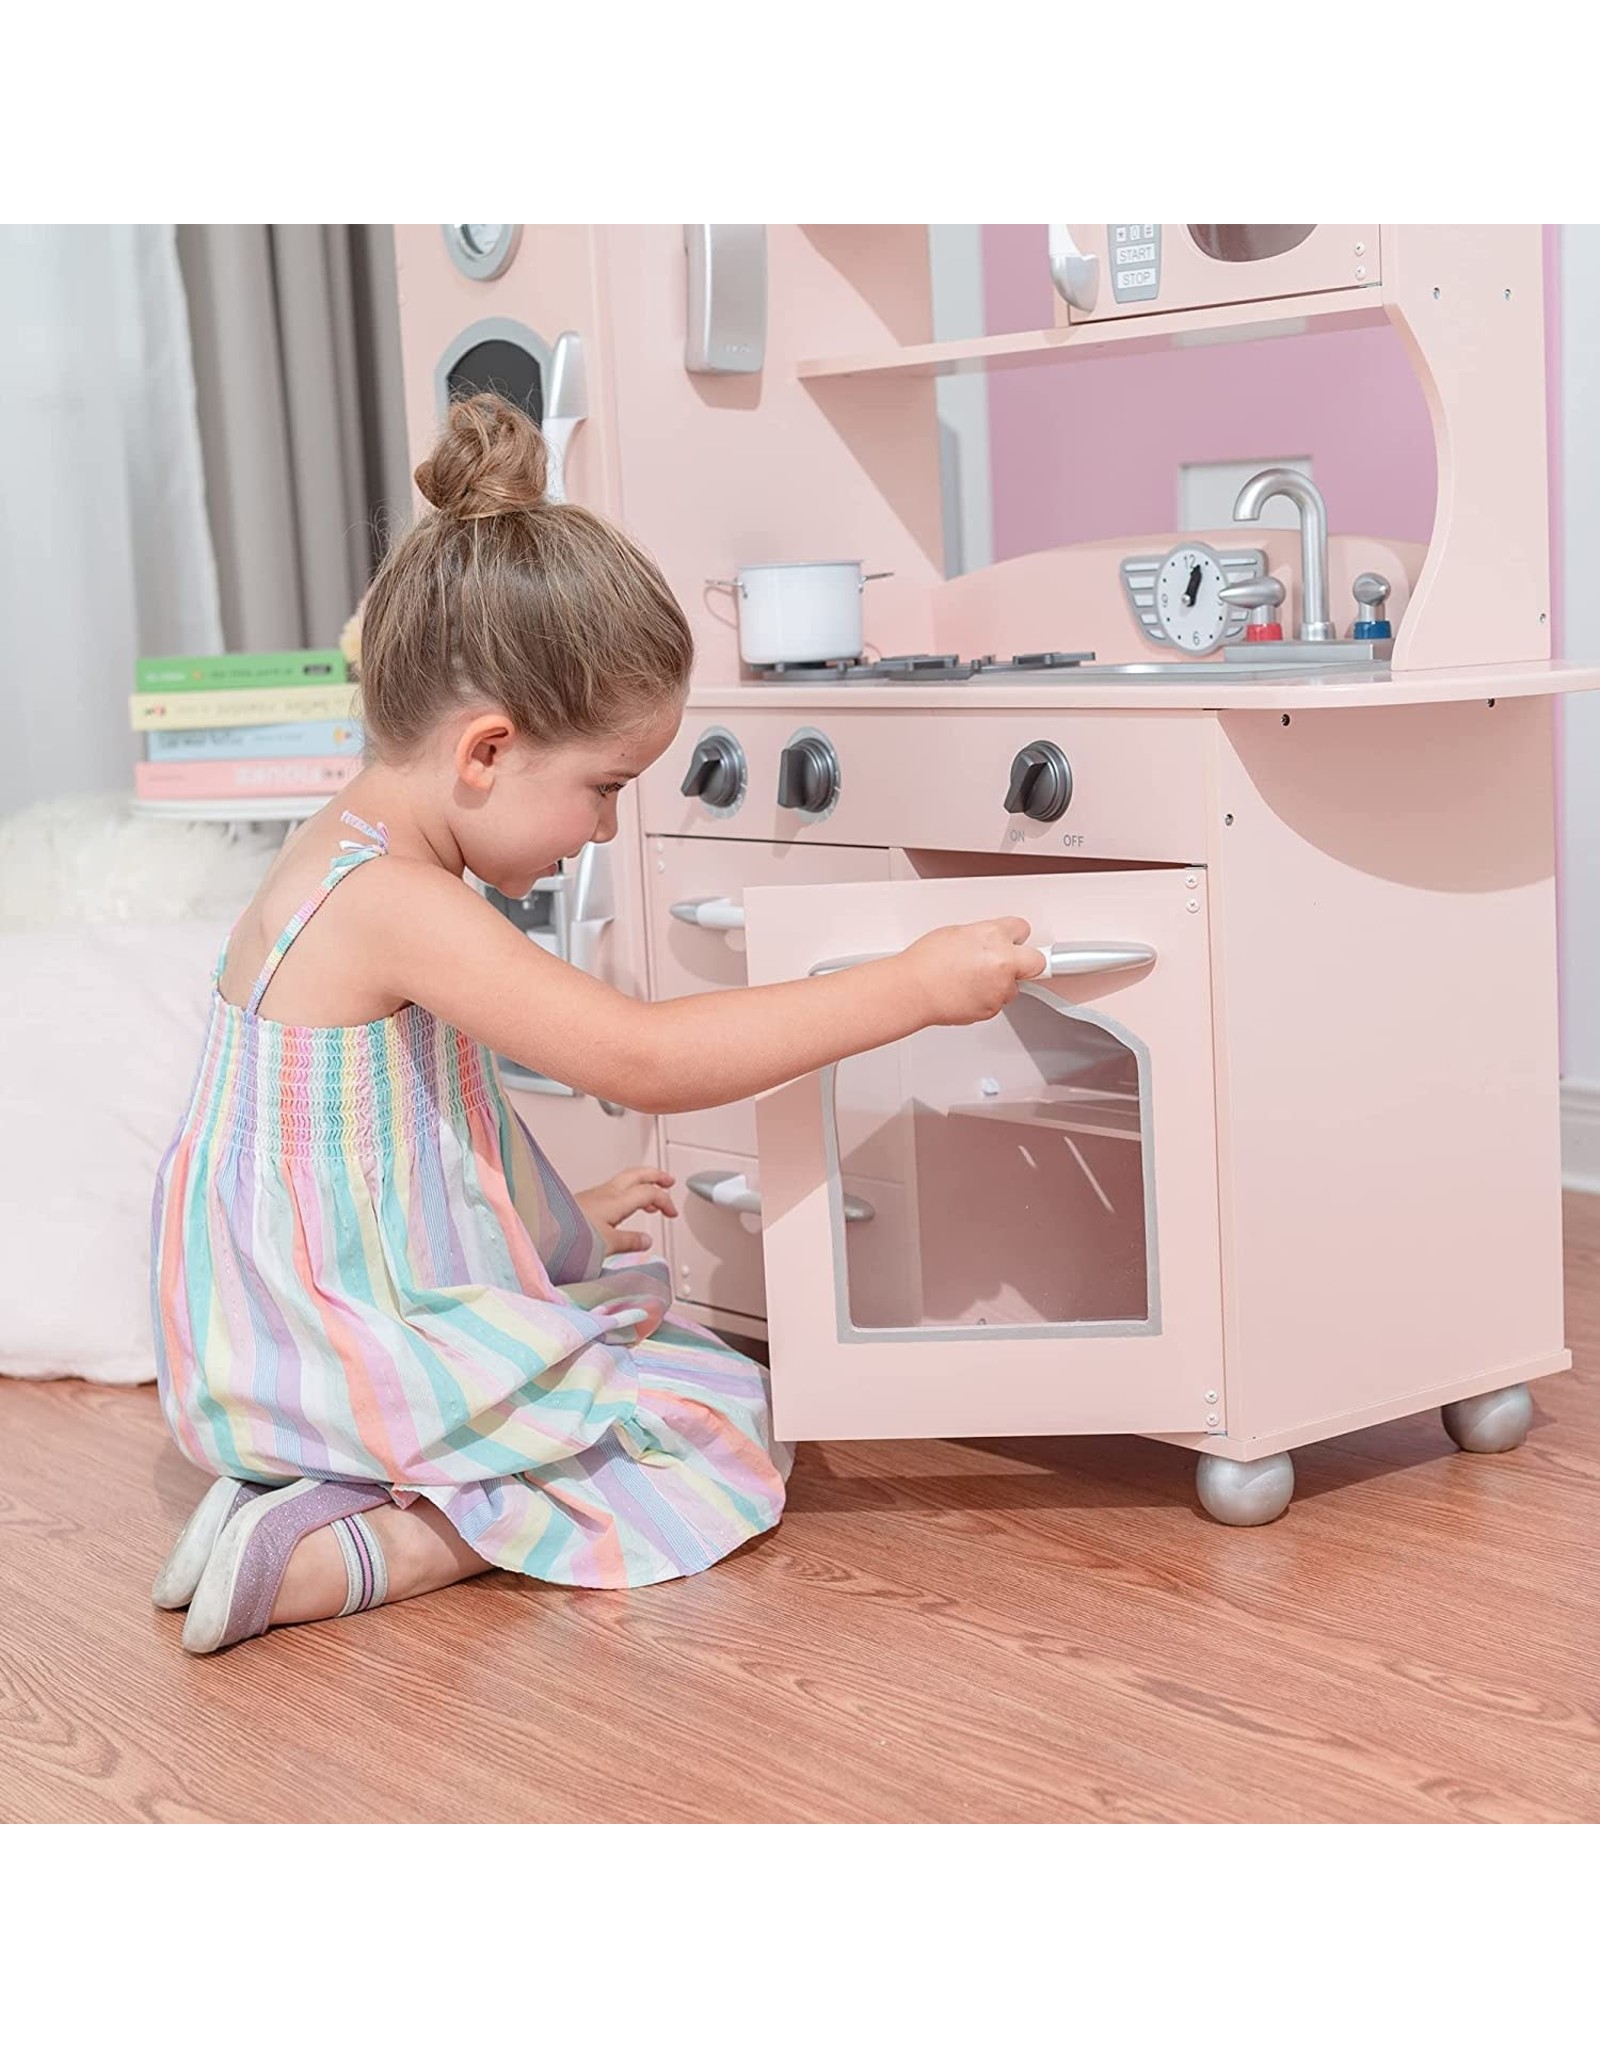 Freezer Oven and Dishwasher Teamson Kids Pink Retro Play Kitchen with Refrigerator 1 Pcs